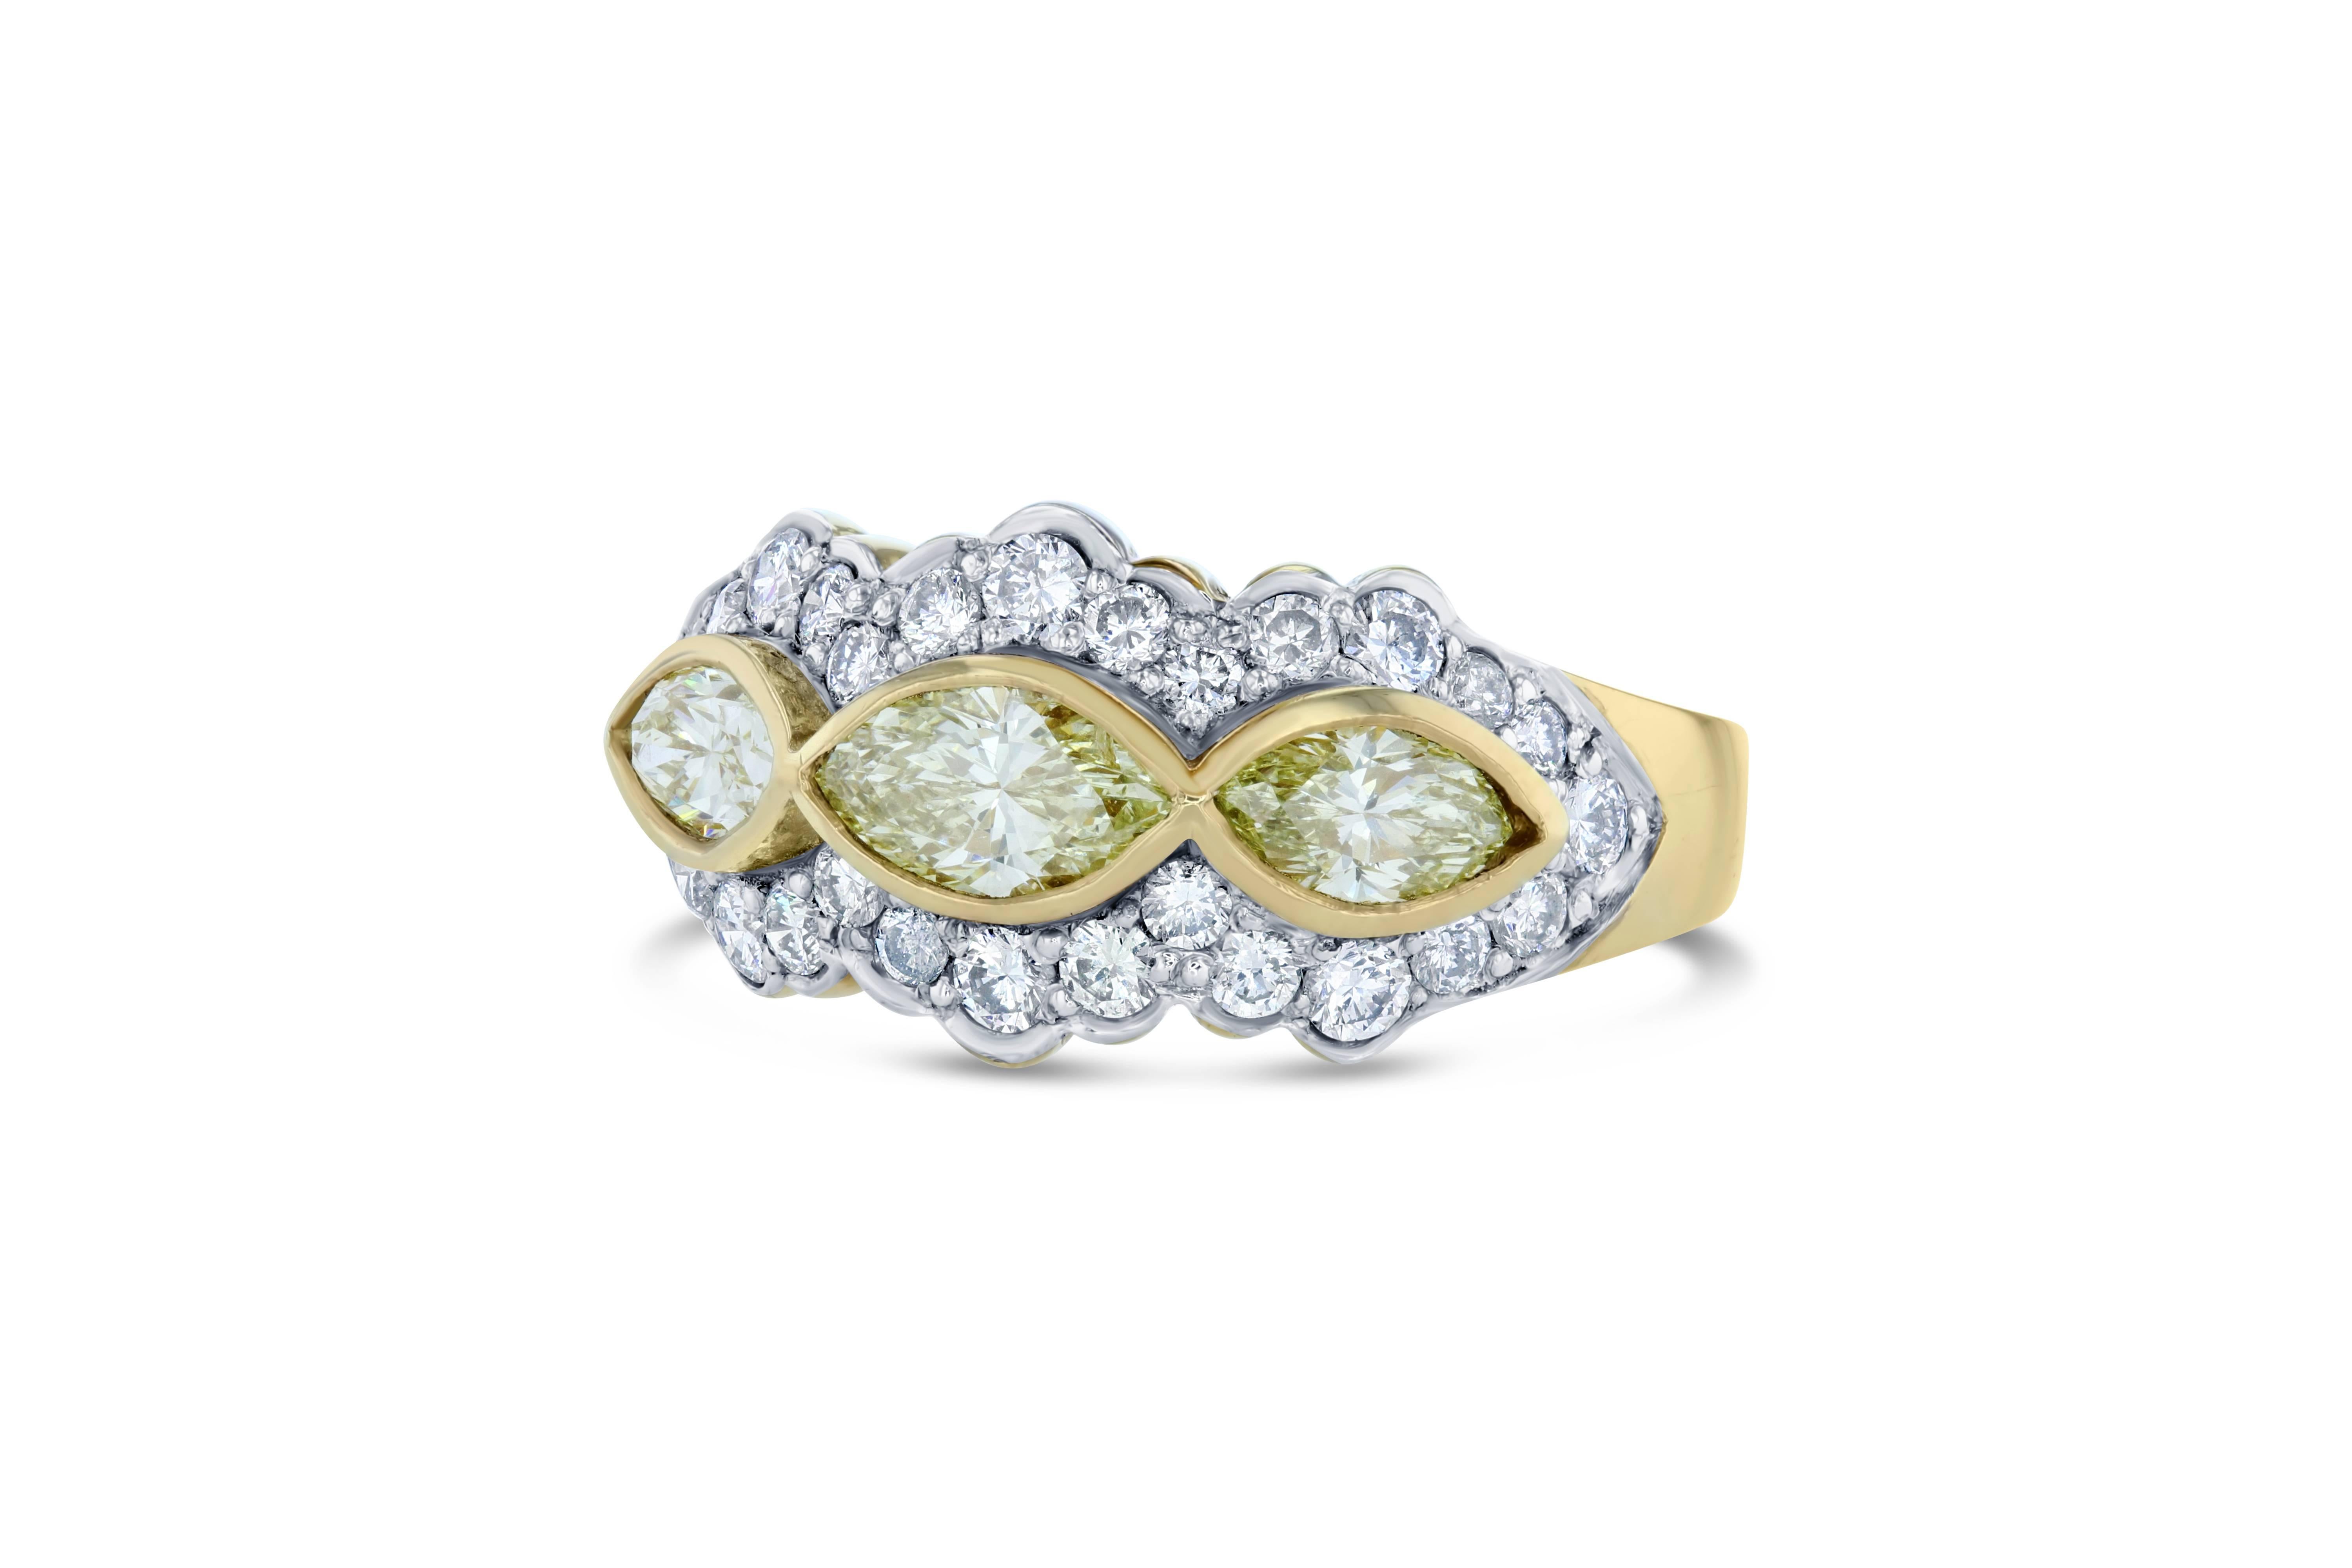 A gorgeous cocktail ring that will elevate your accessory collection ! 

There are 3 Natural Marquise cut Yellow Diamonds that weigh 0.97 carat and are surrounded by 28 Round cut diamonds that weigh 0.70 carat. The total carat weight of the ring is